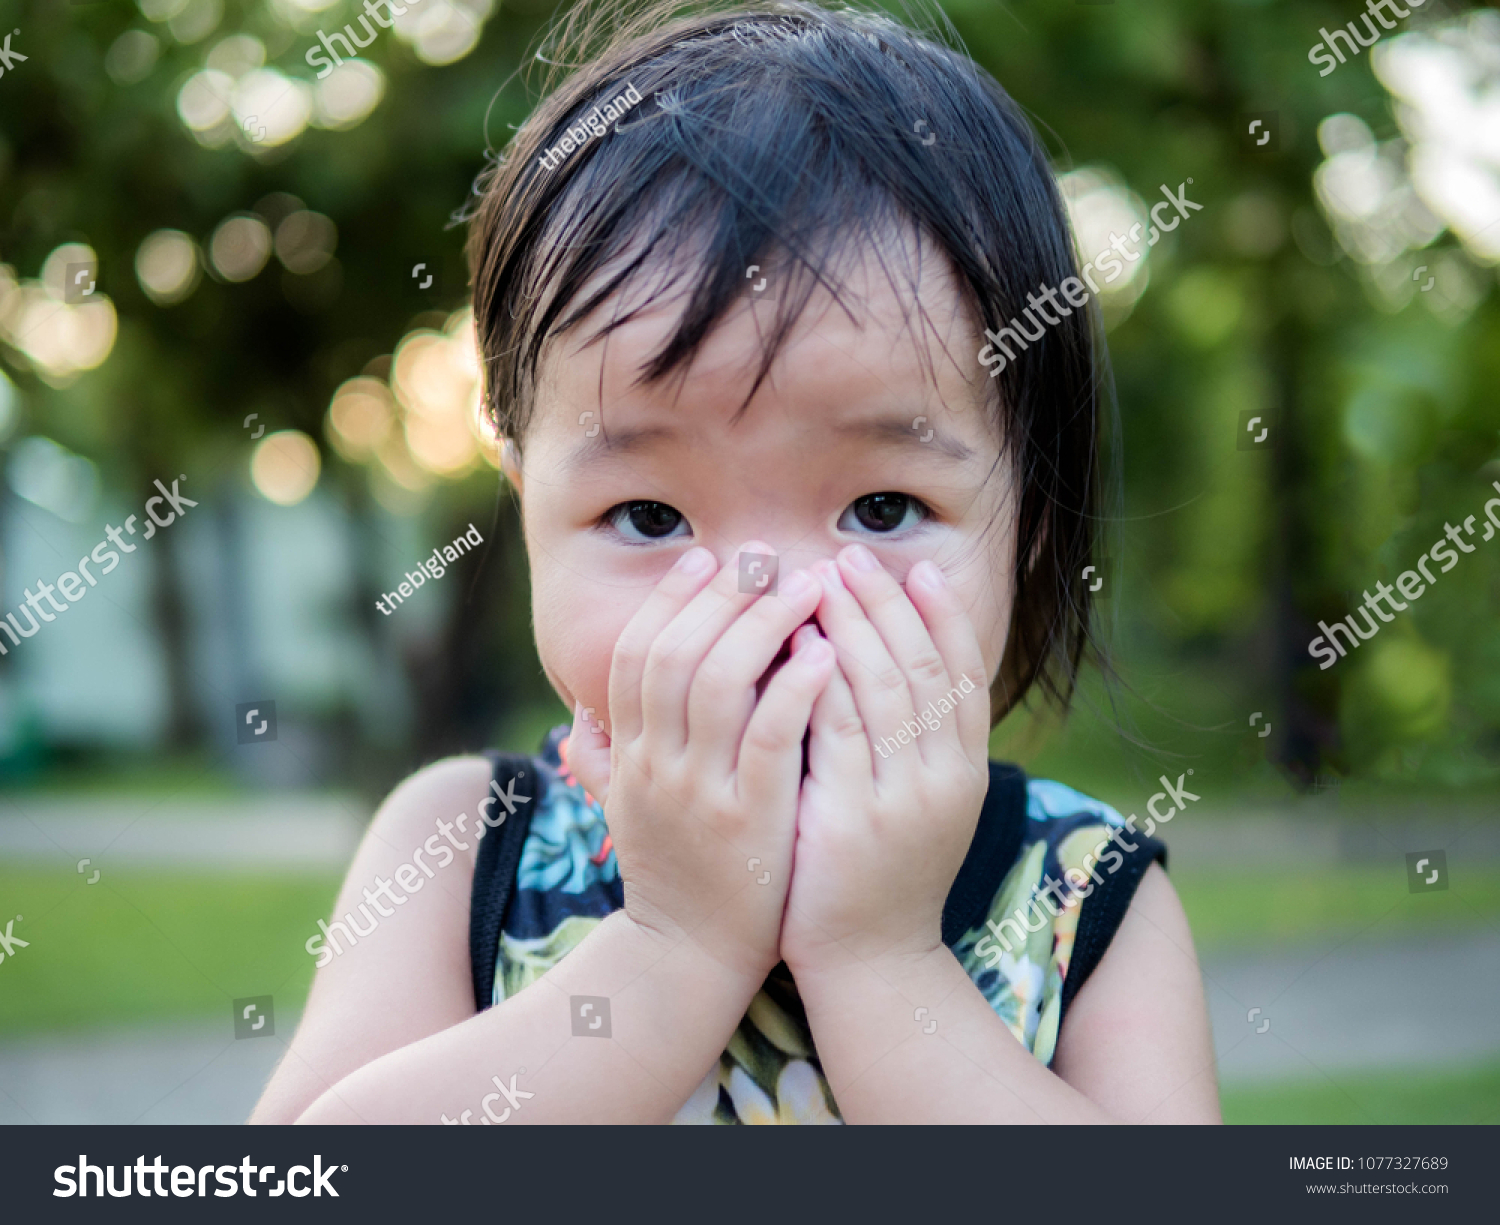 Cute asian little girl put his hand up cover mouth #1077327689